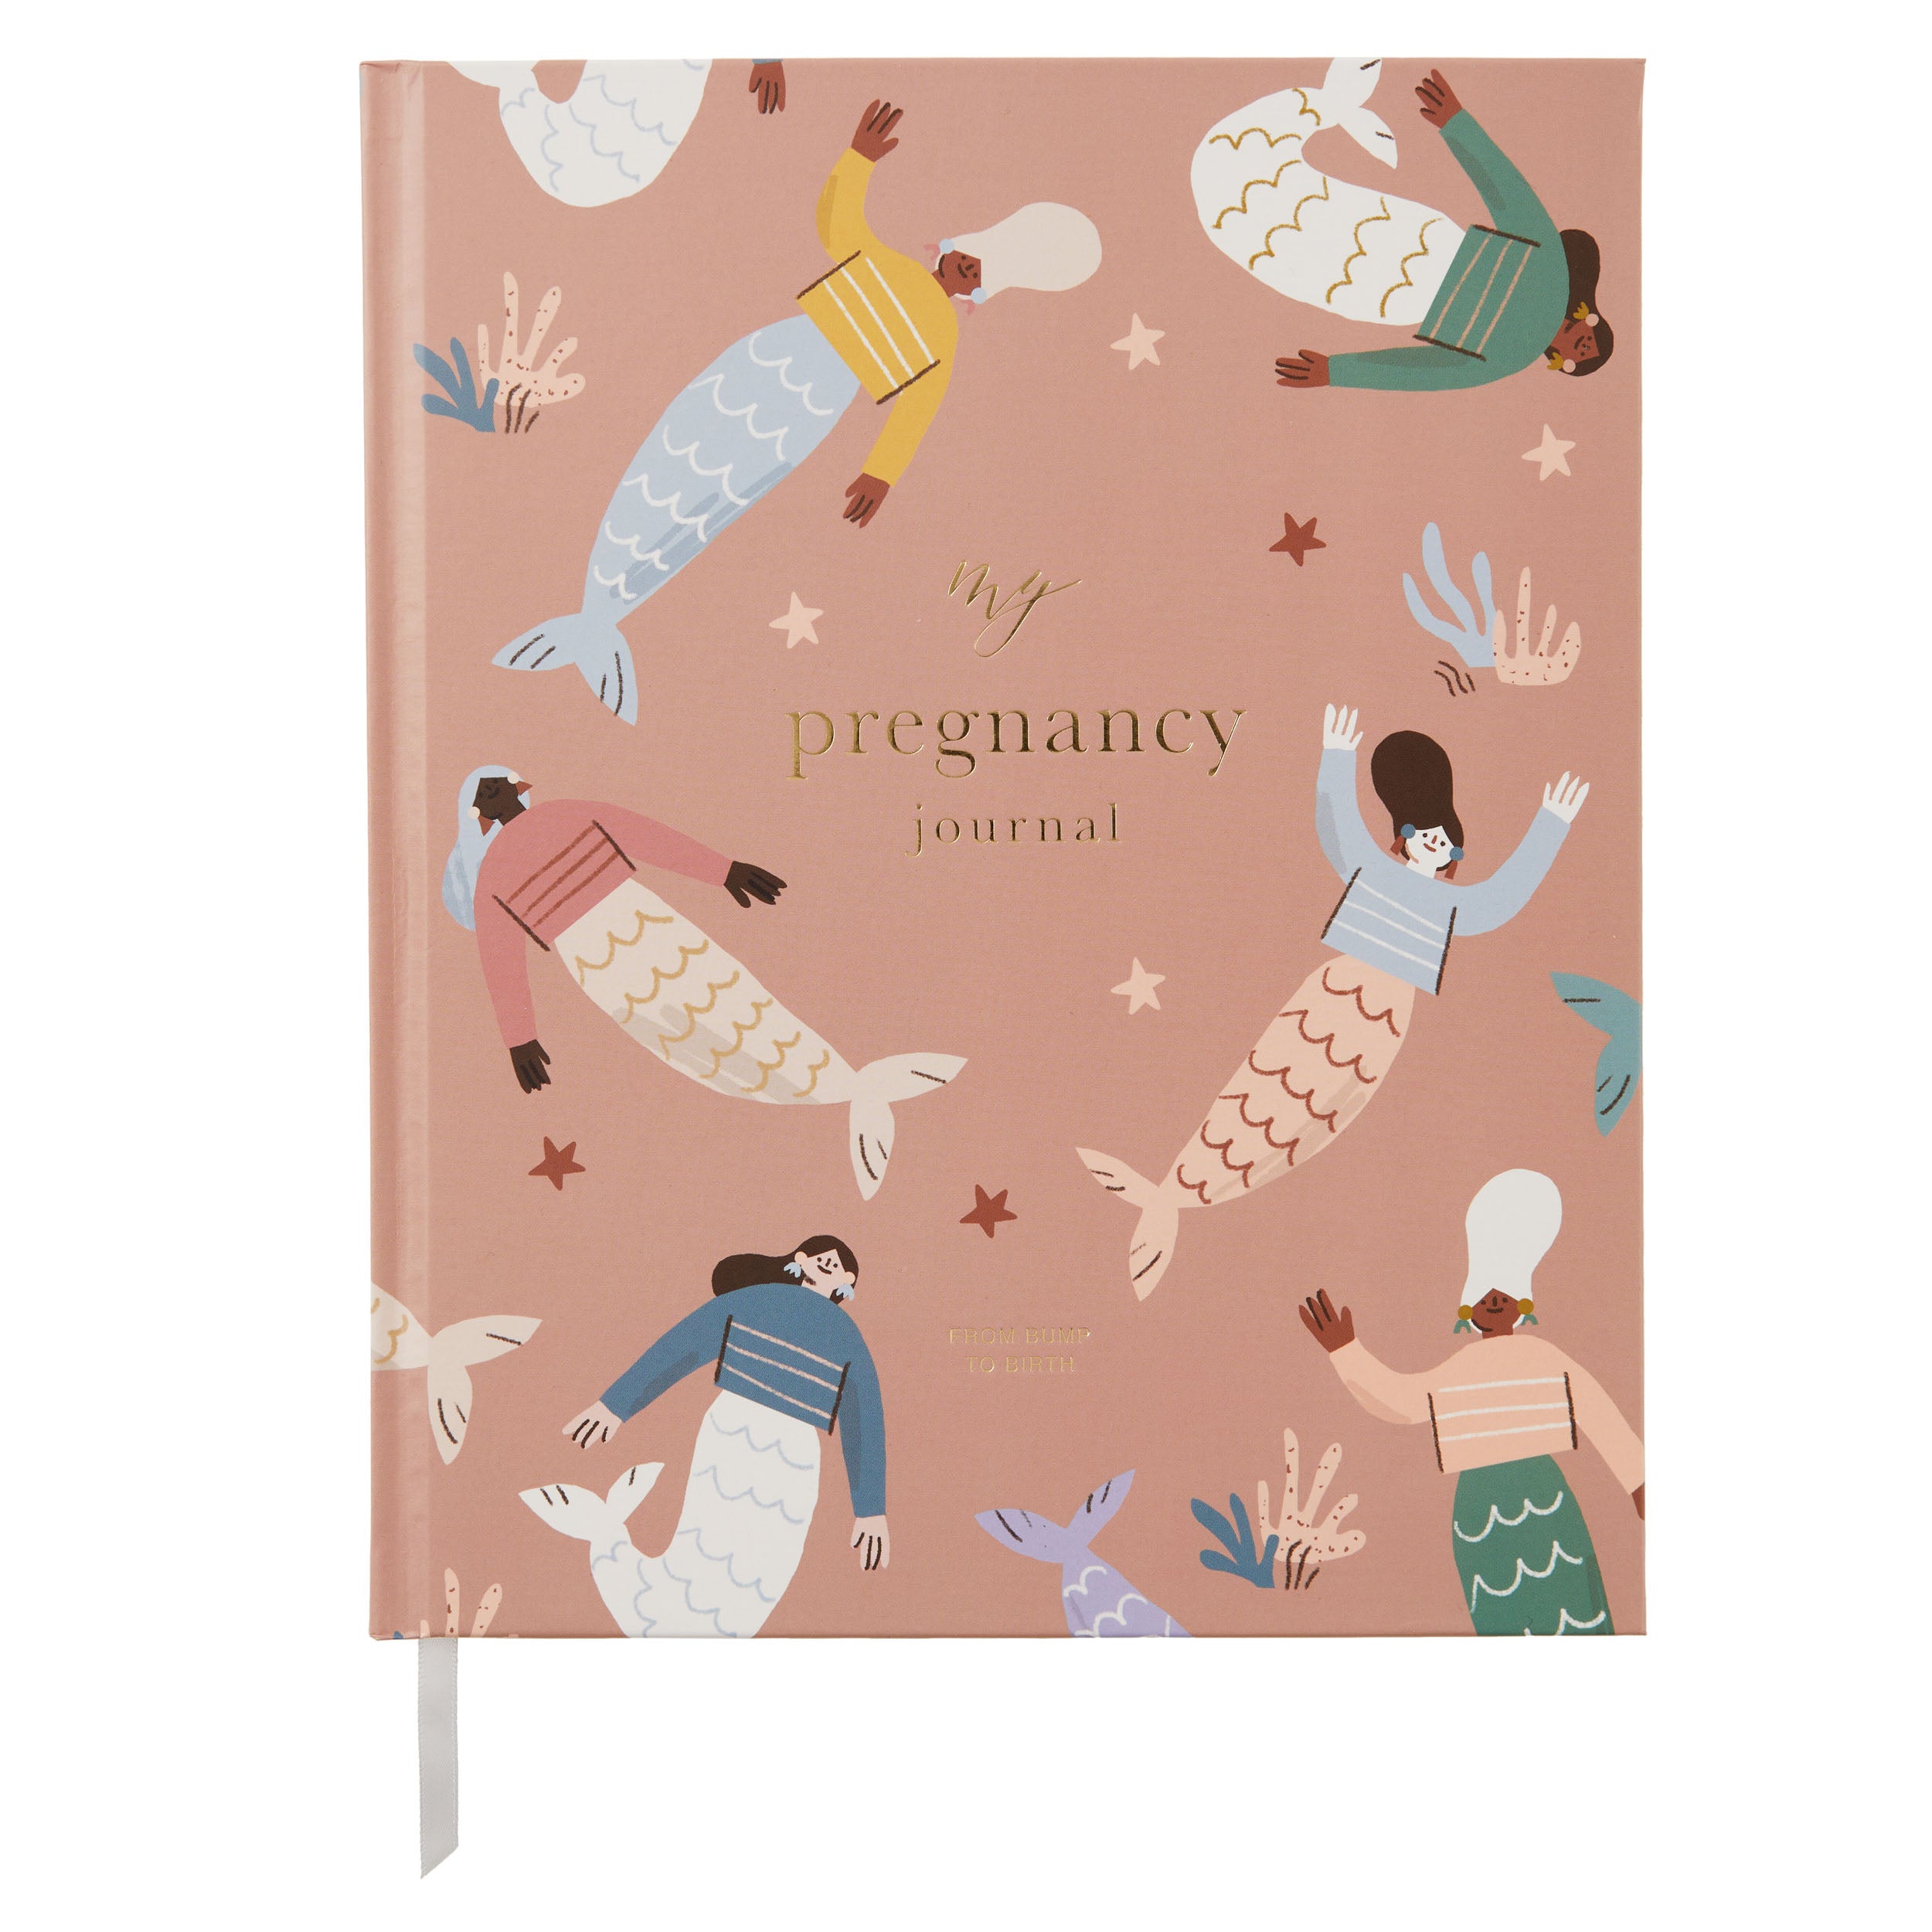 My Pregnancy Journal - Mermaids with Gilded Edges